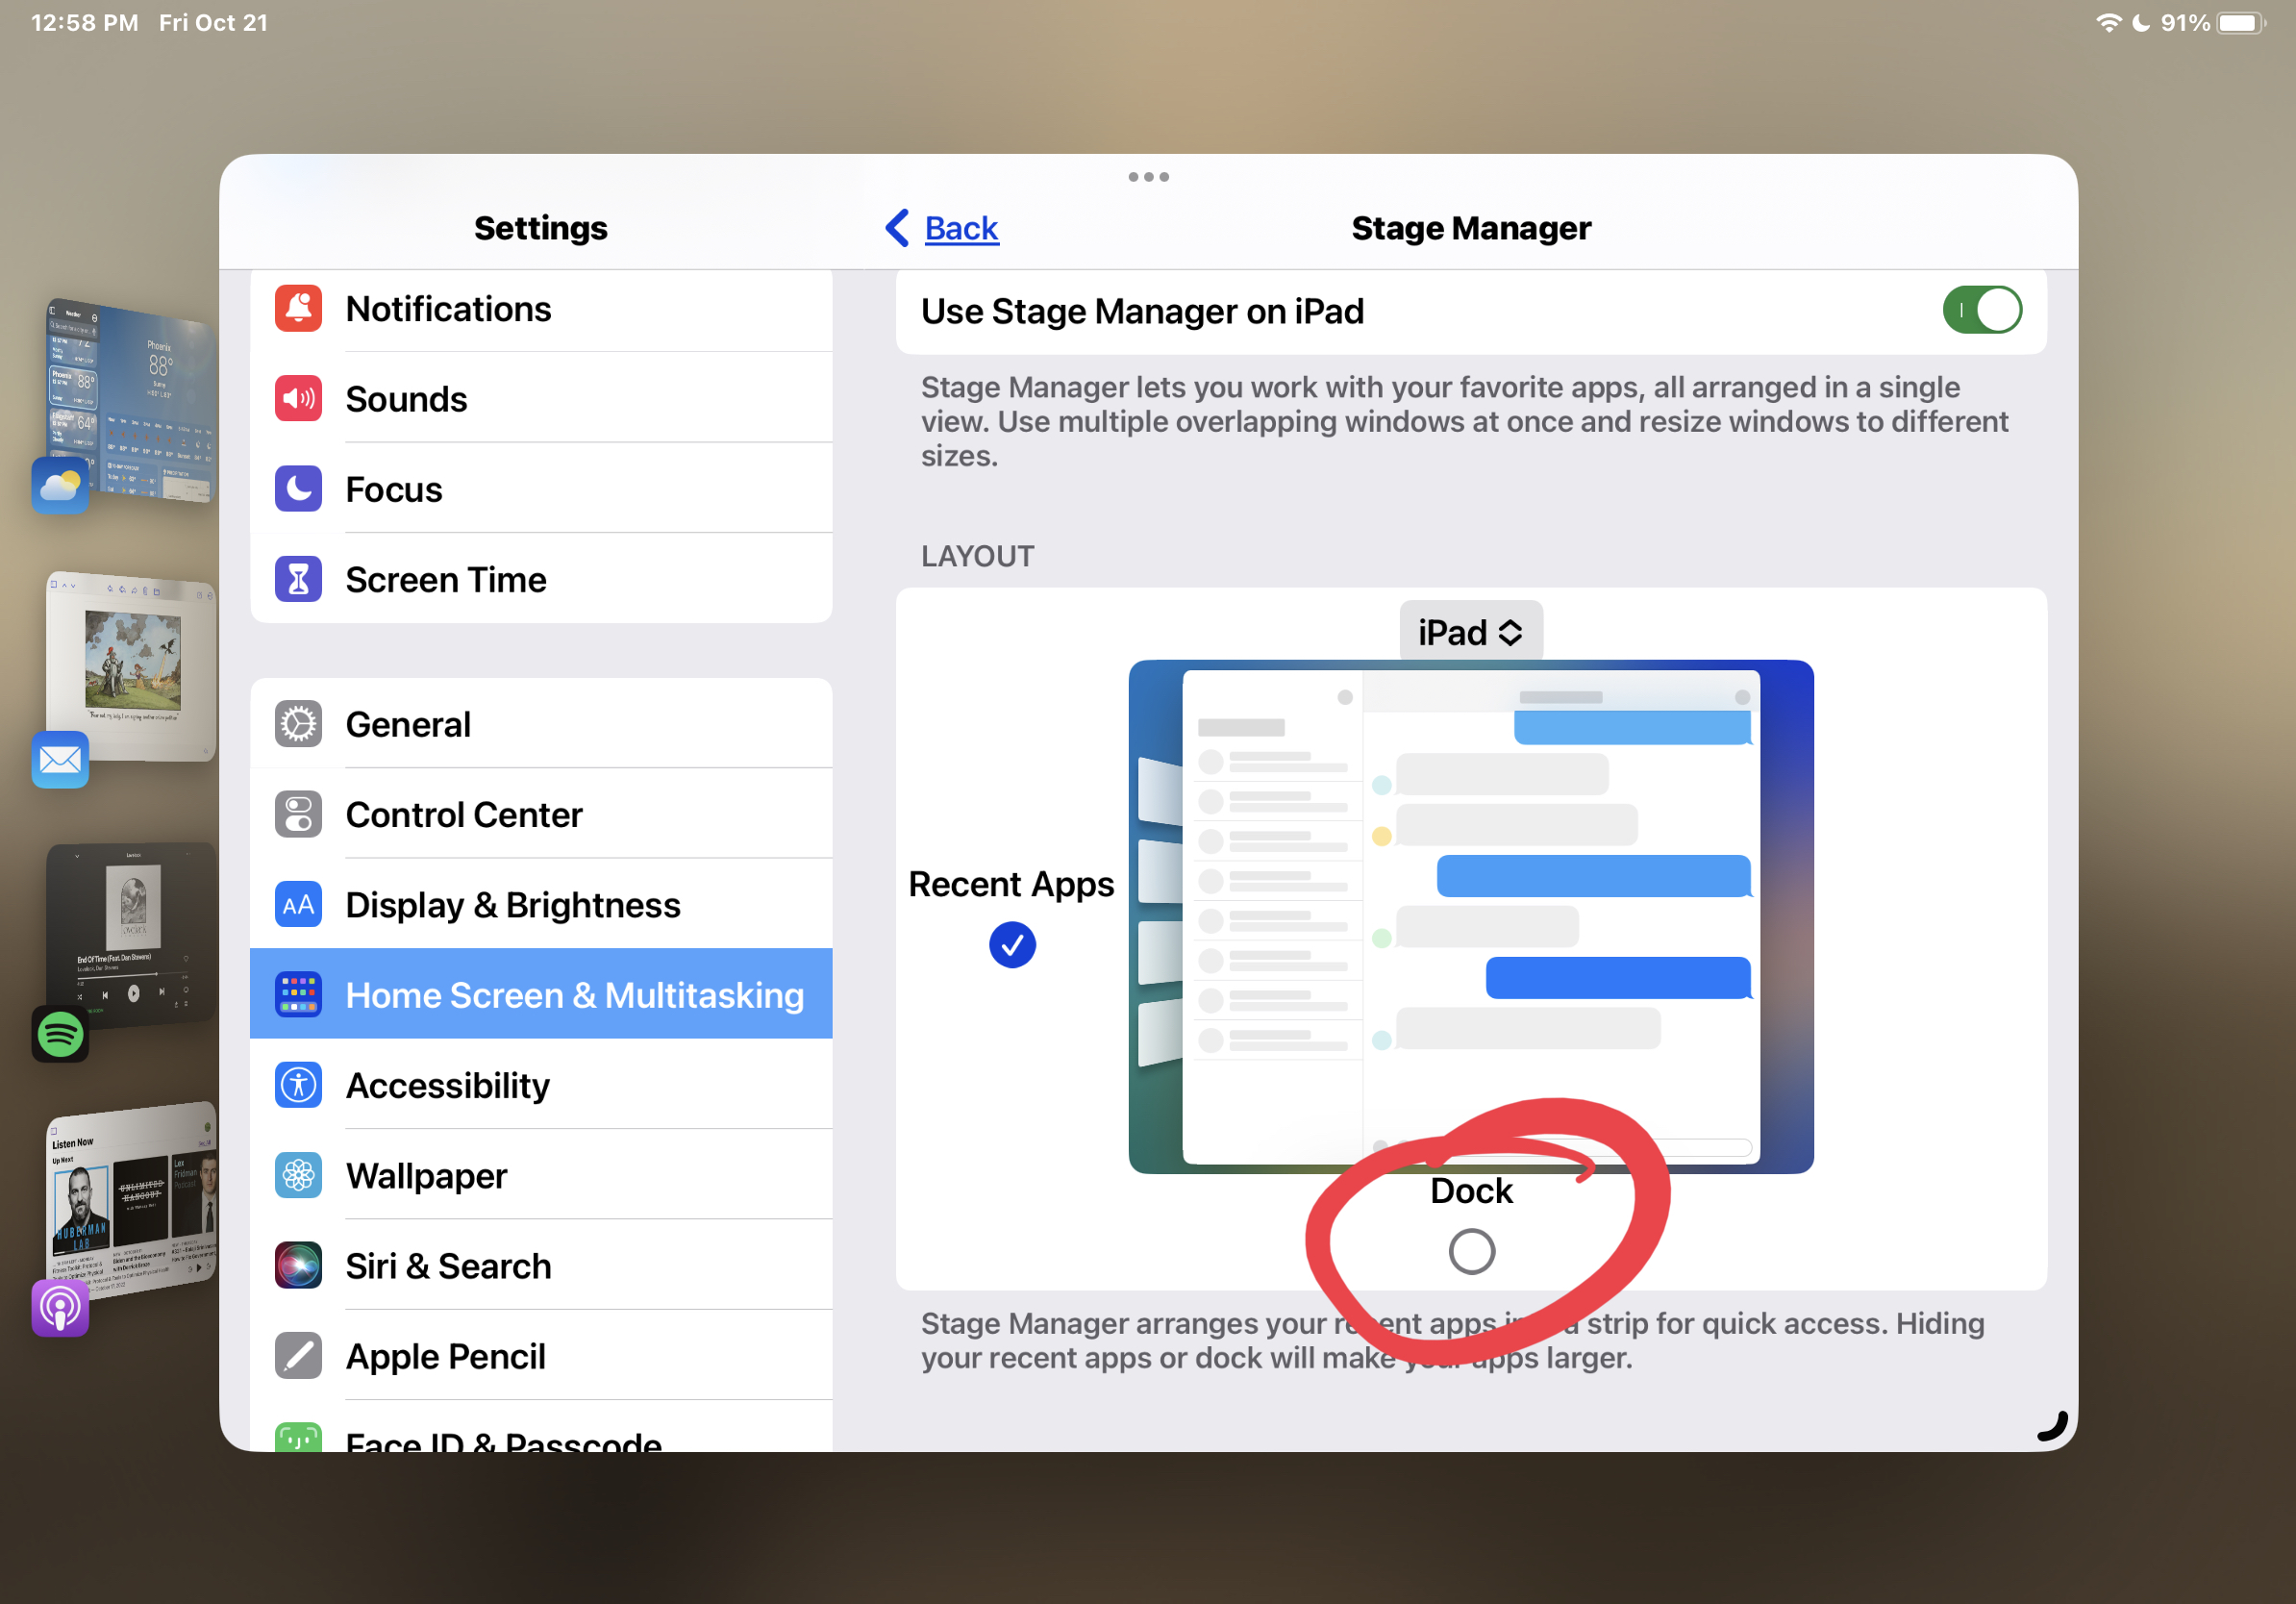 How to Hide the Dock in Stage Manager on iPad